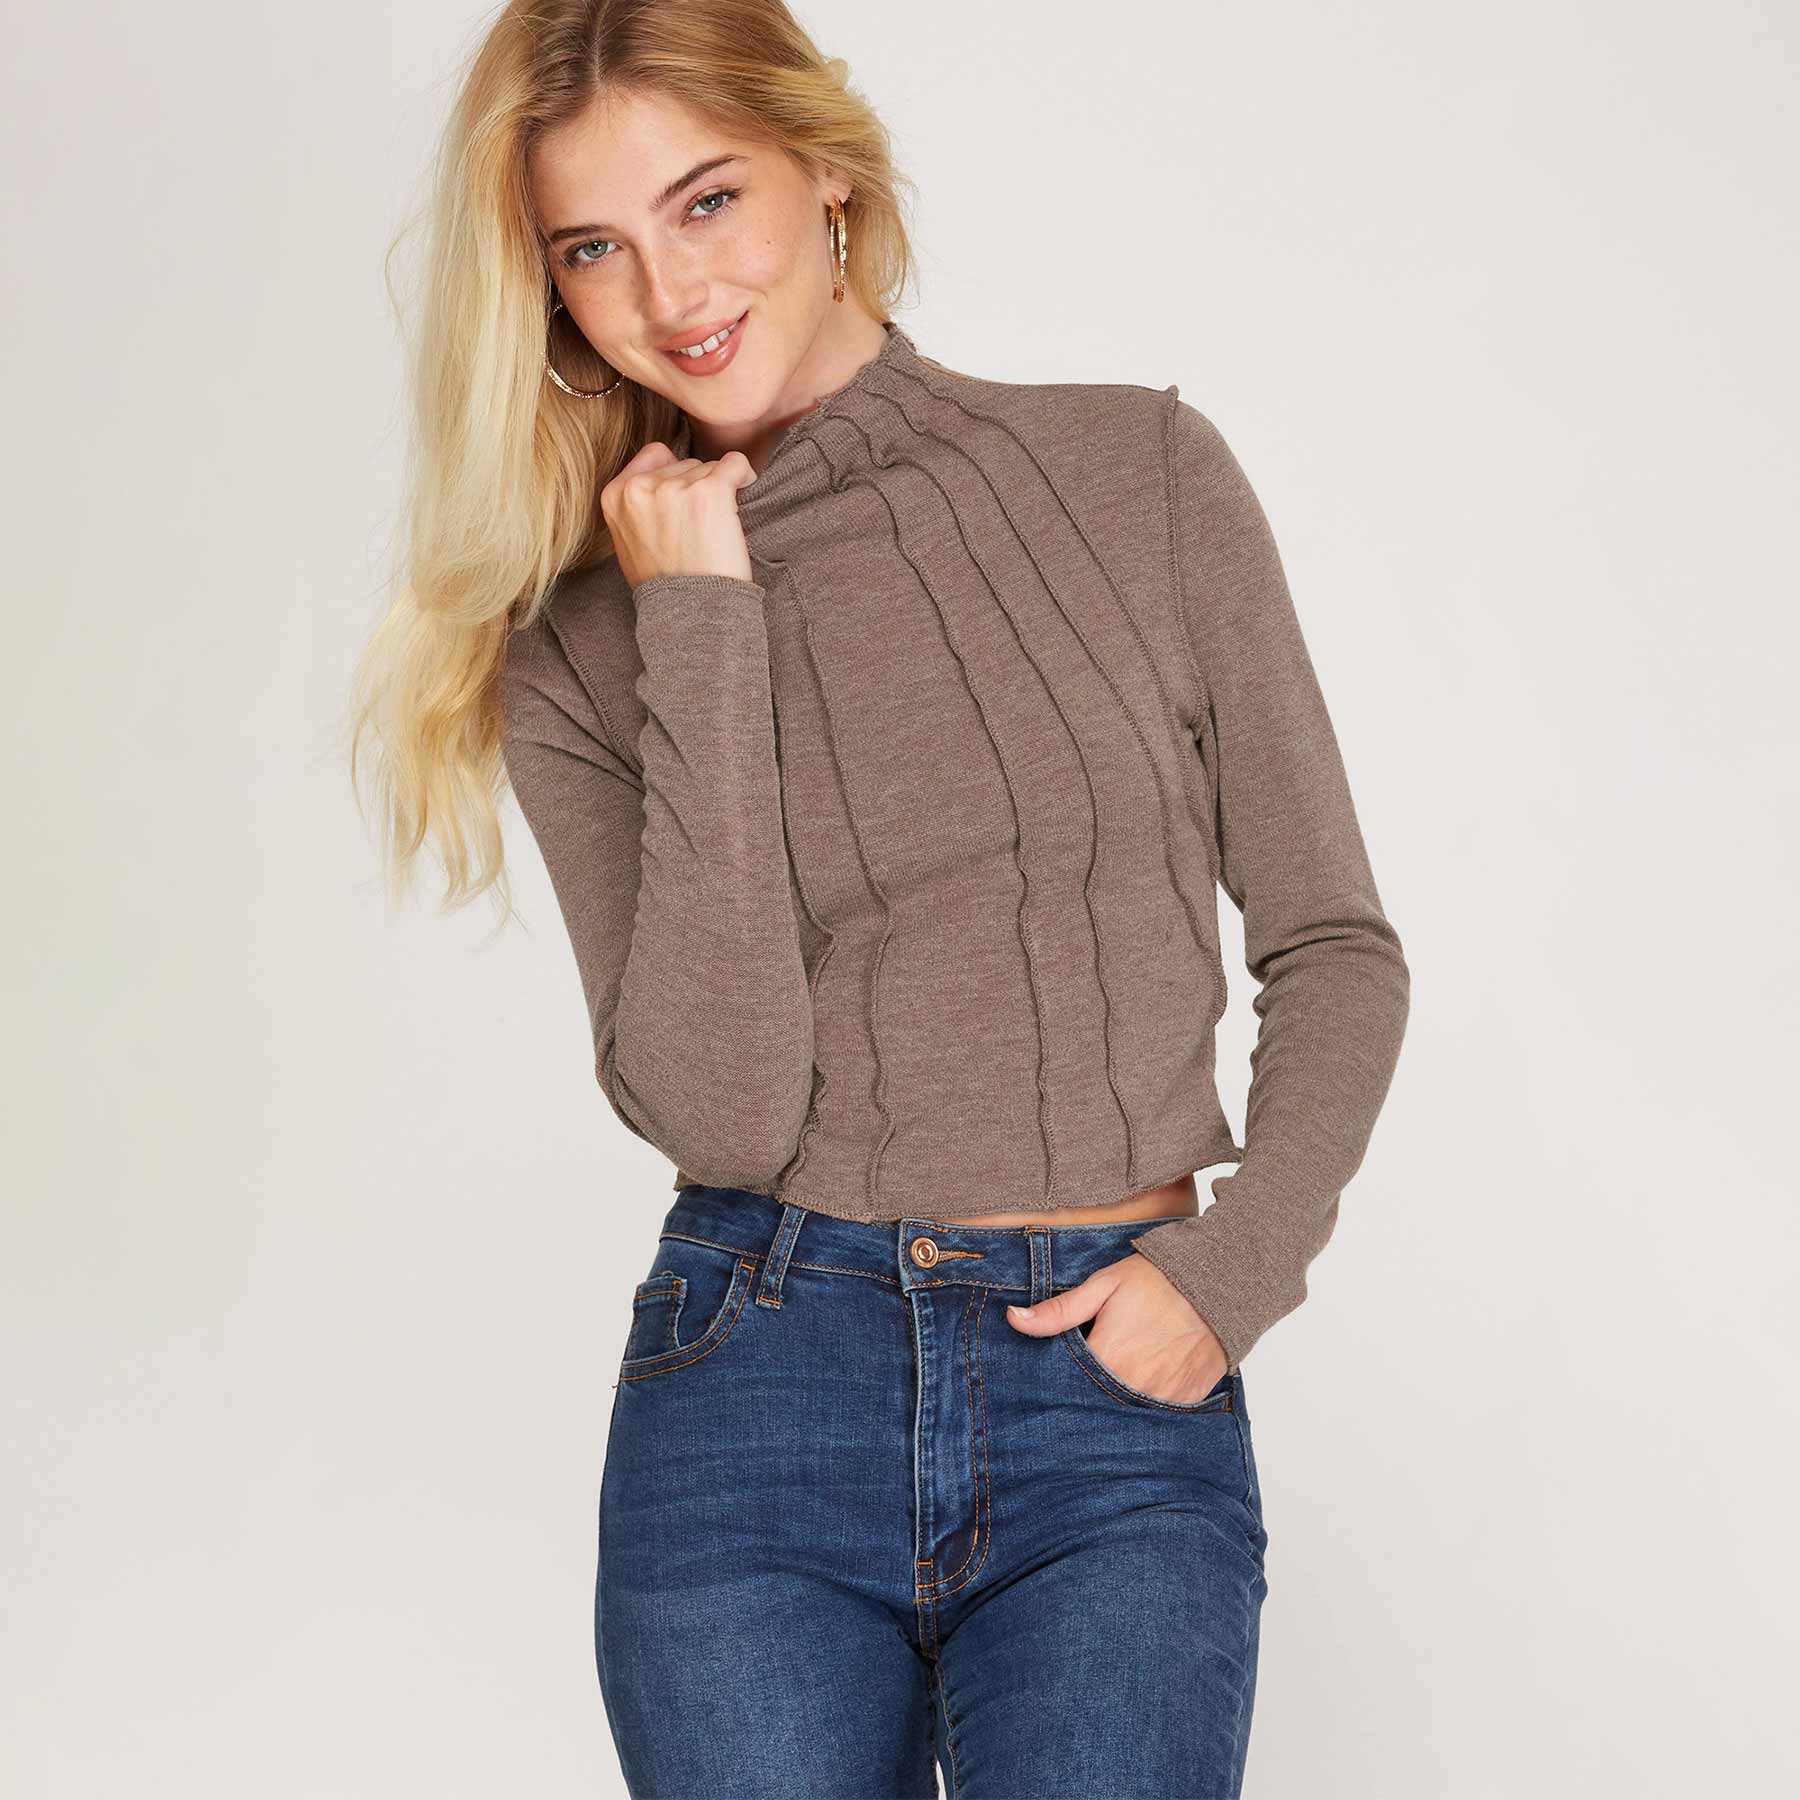 Long Sleeve Knit Top with Overlock Seam Trim Detail